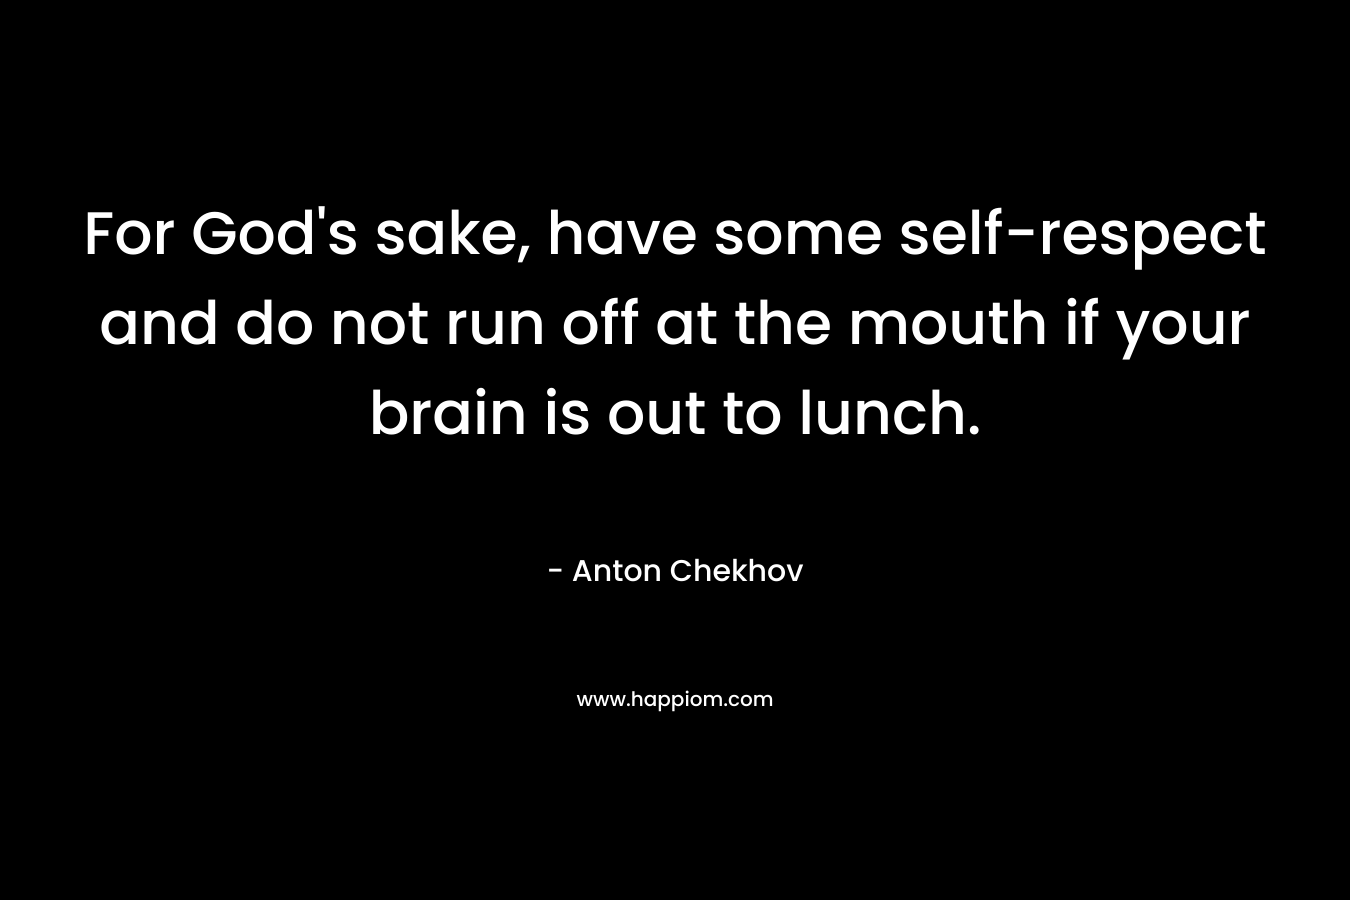 For God’s sake, have some self-respect and do not run off at the mouth if your brain is out to lunch. – Anton Chekhov